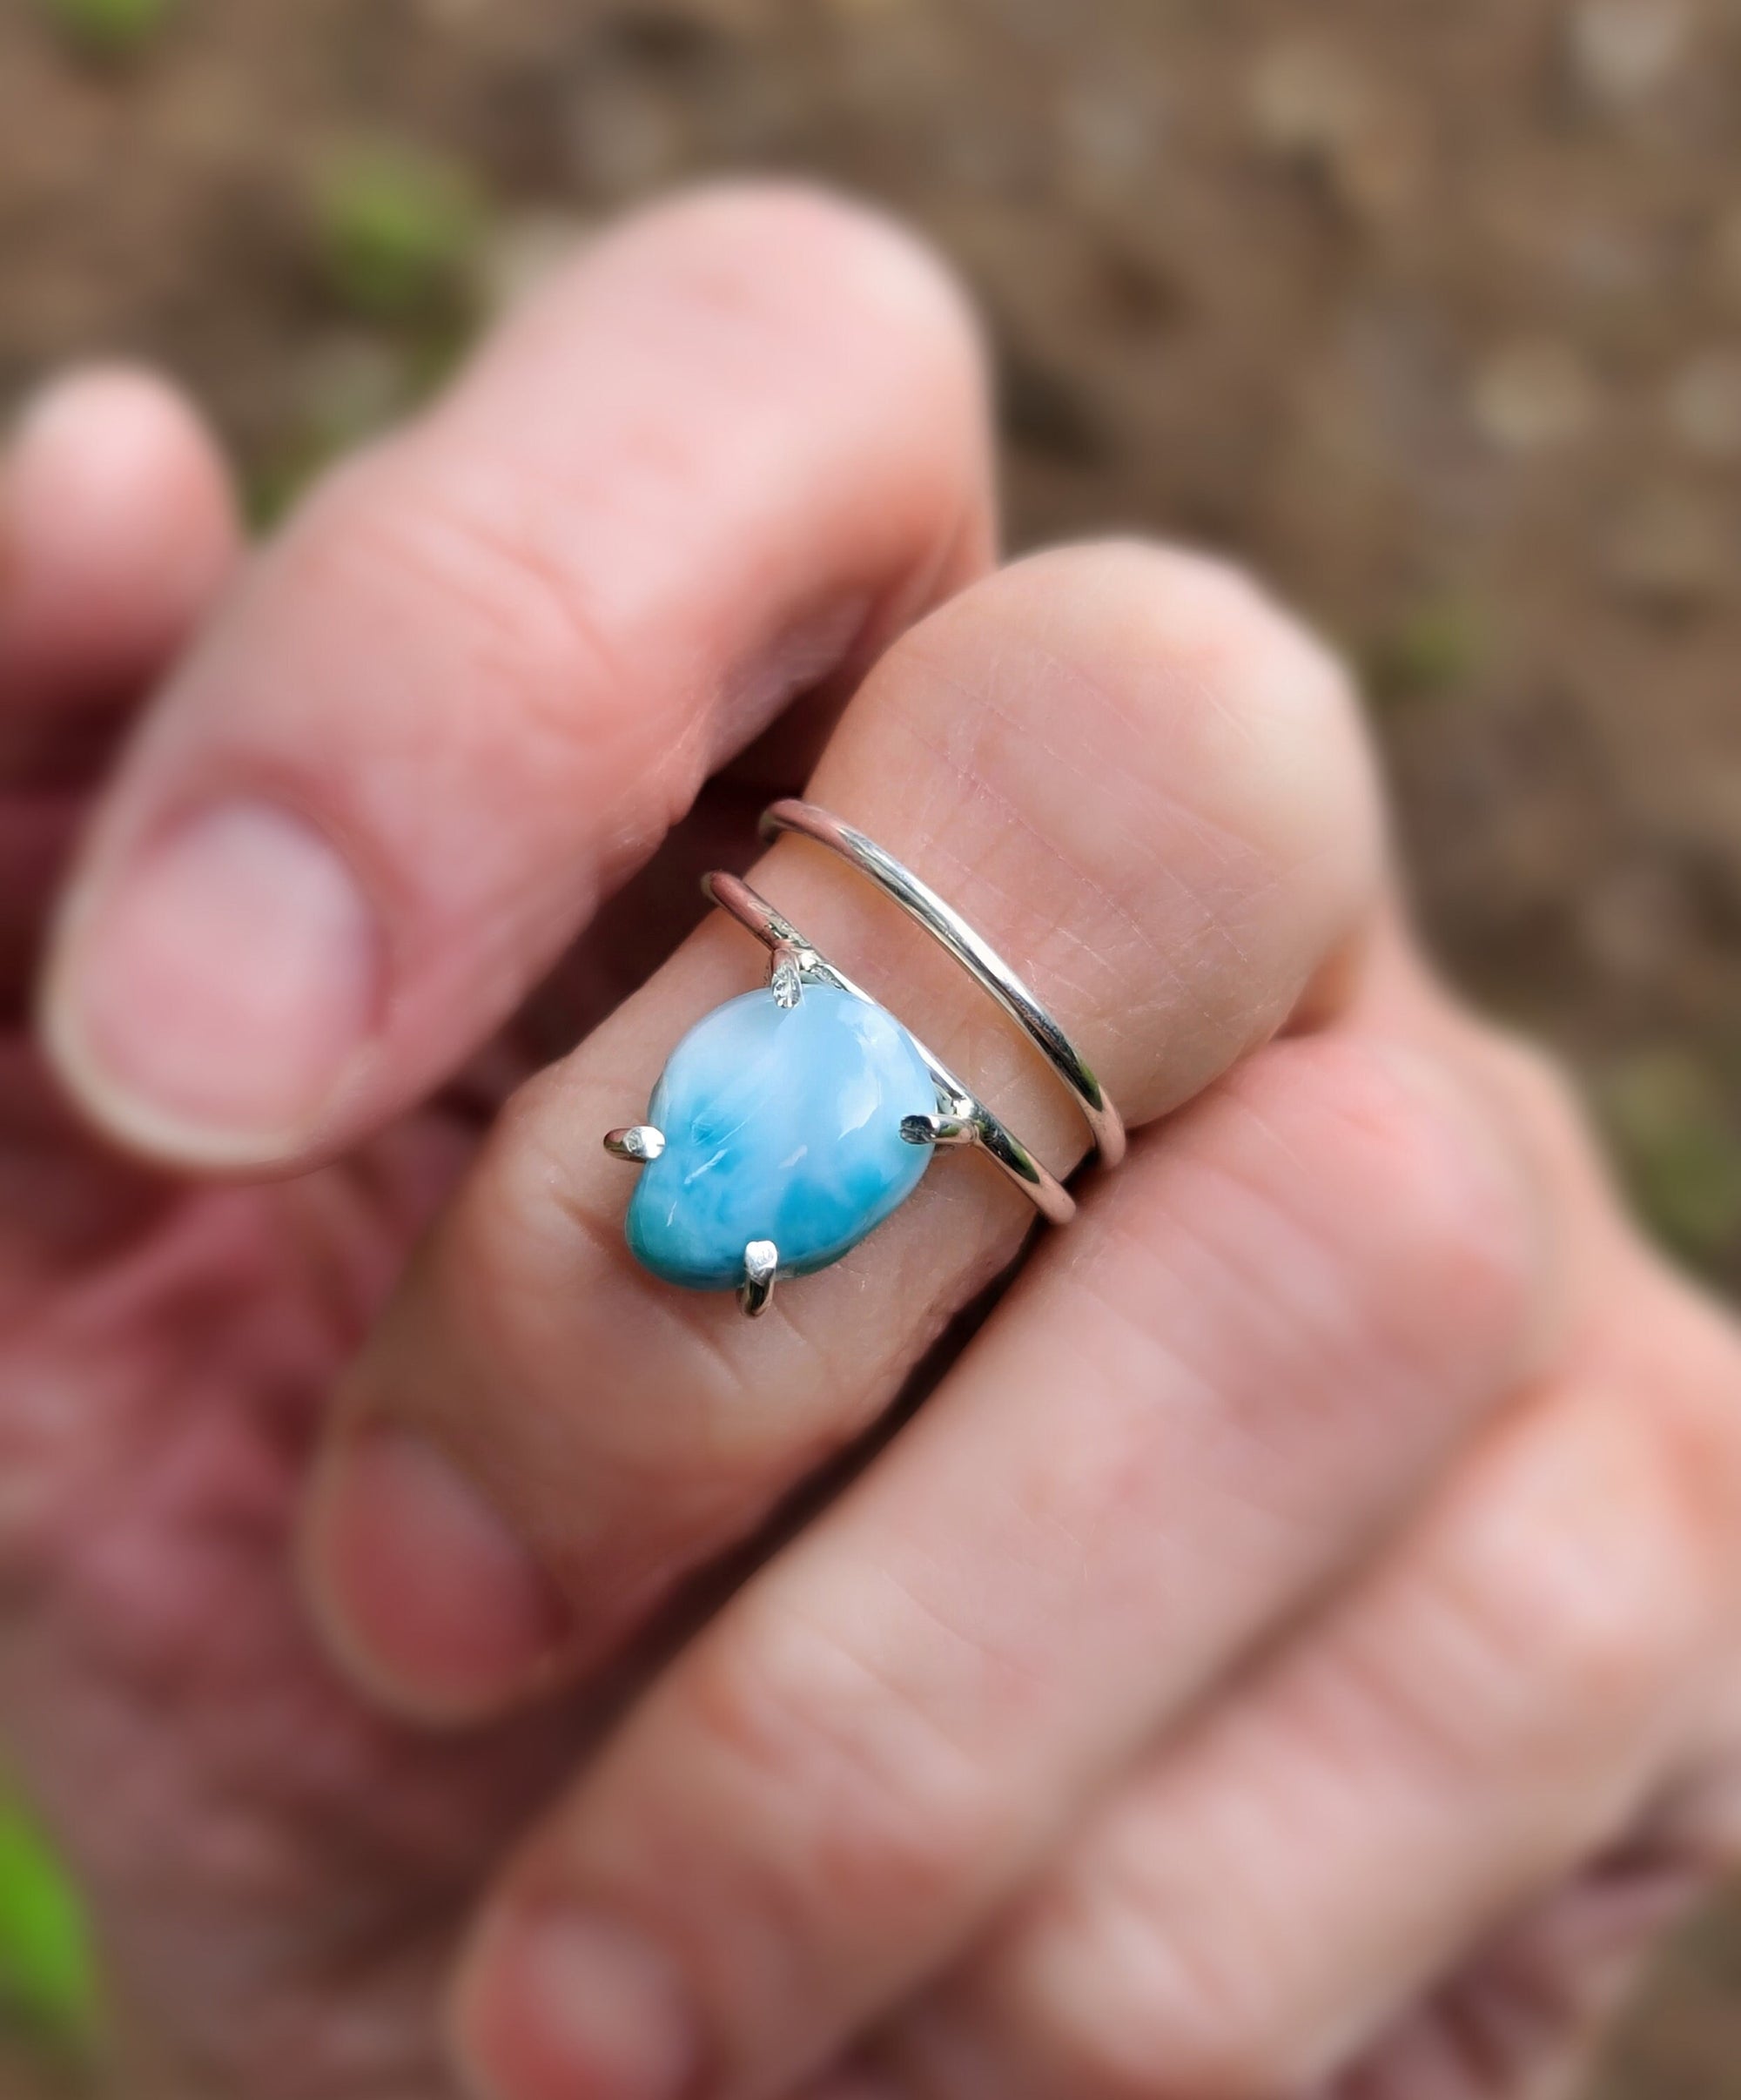 Larimar in Fine Silver Ring, Unique Ring with Blue Larimar Gemstone, High End Luxury Jewelry for Wife, Girlfriend, Mom, Ready to ship Size 6